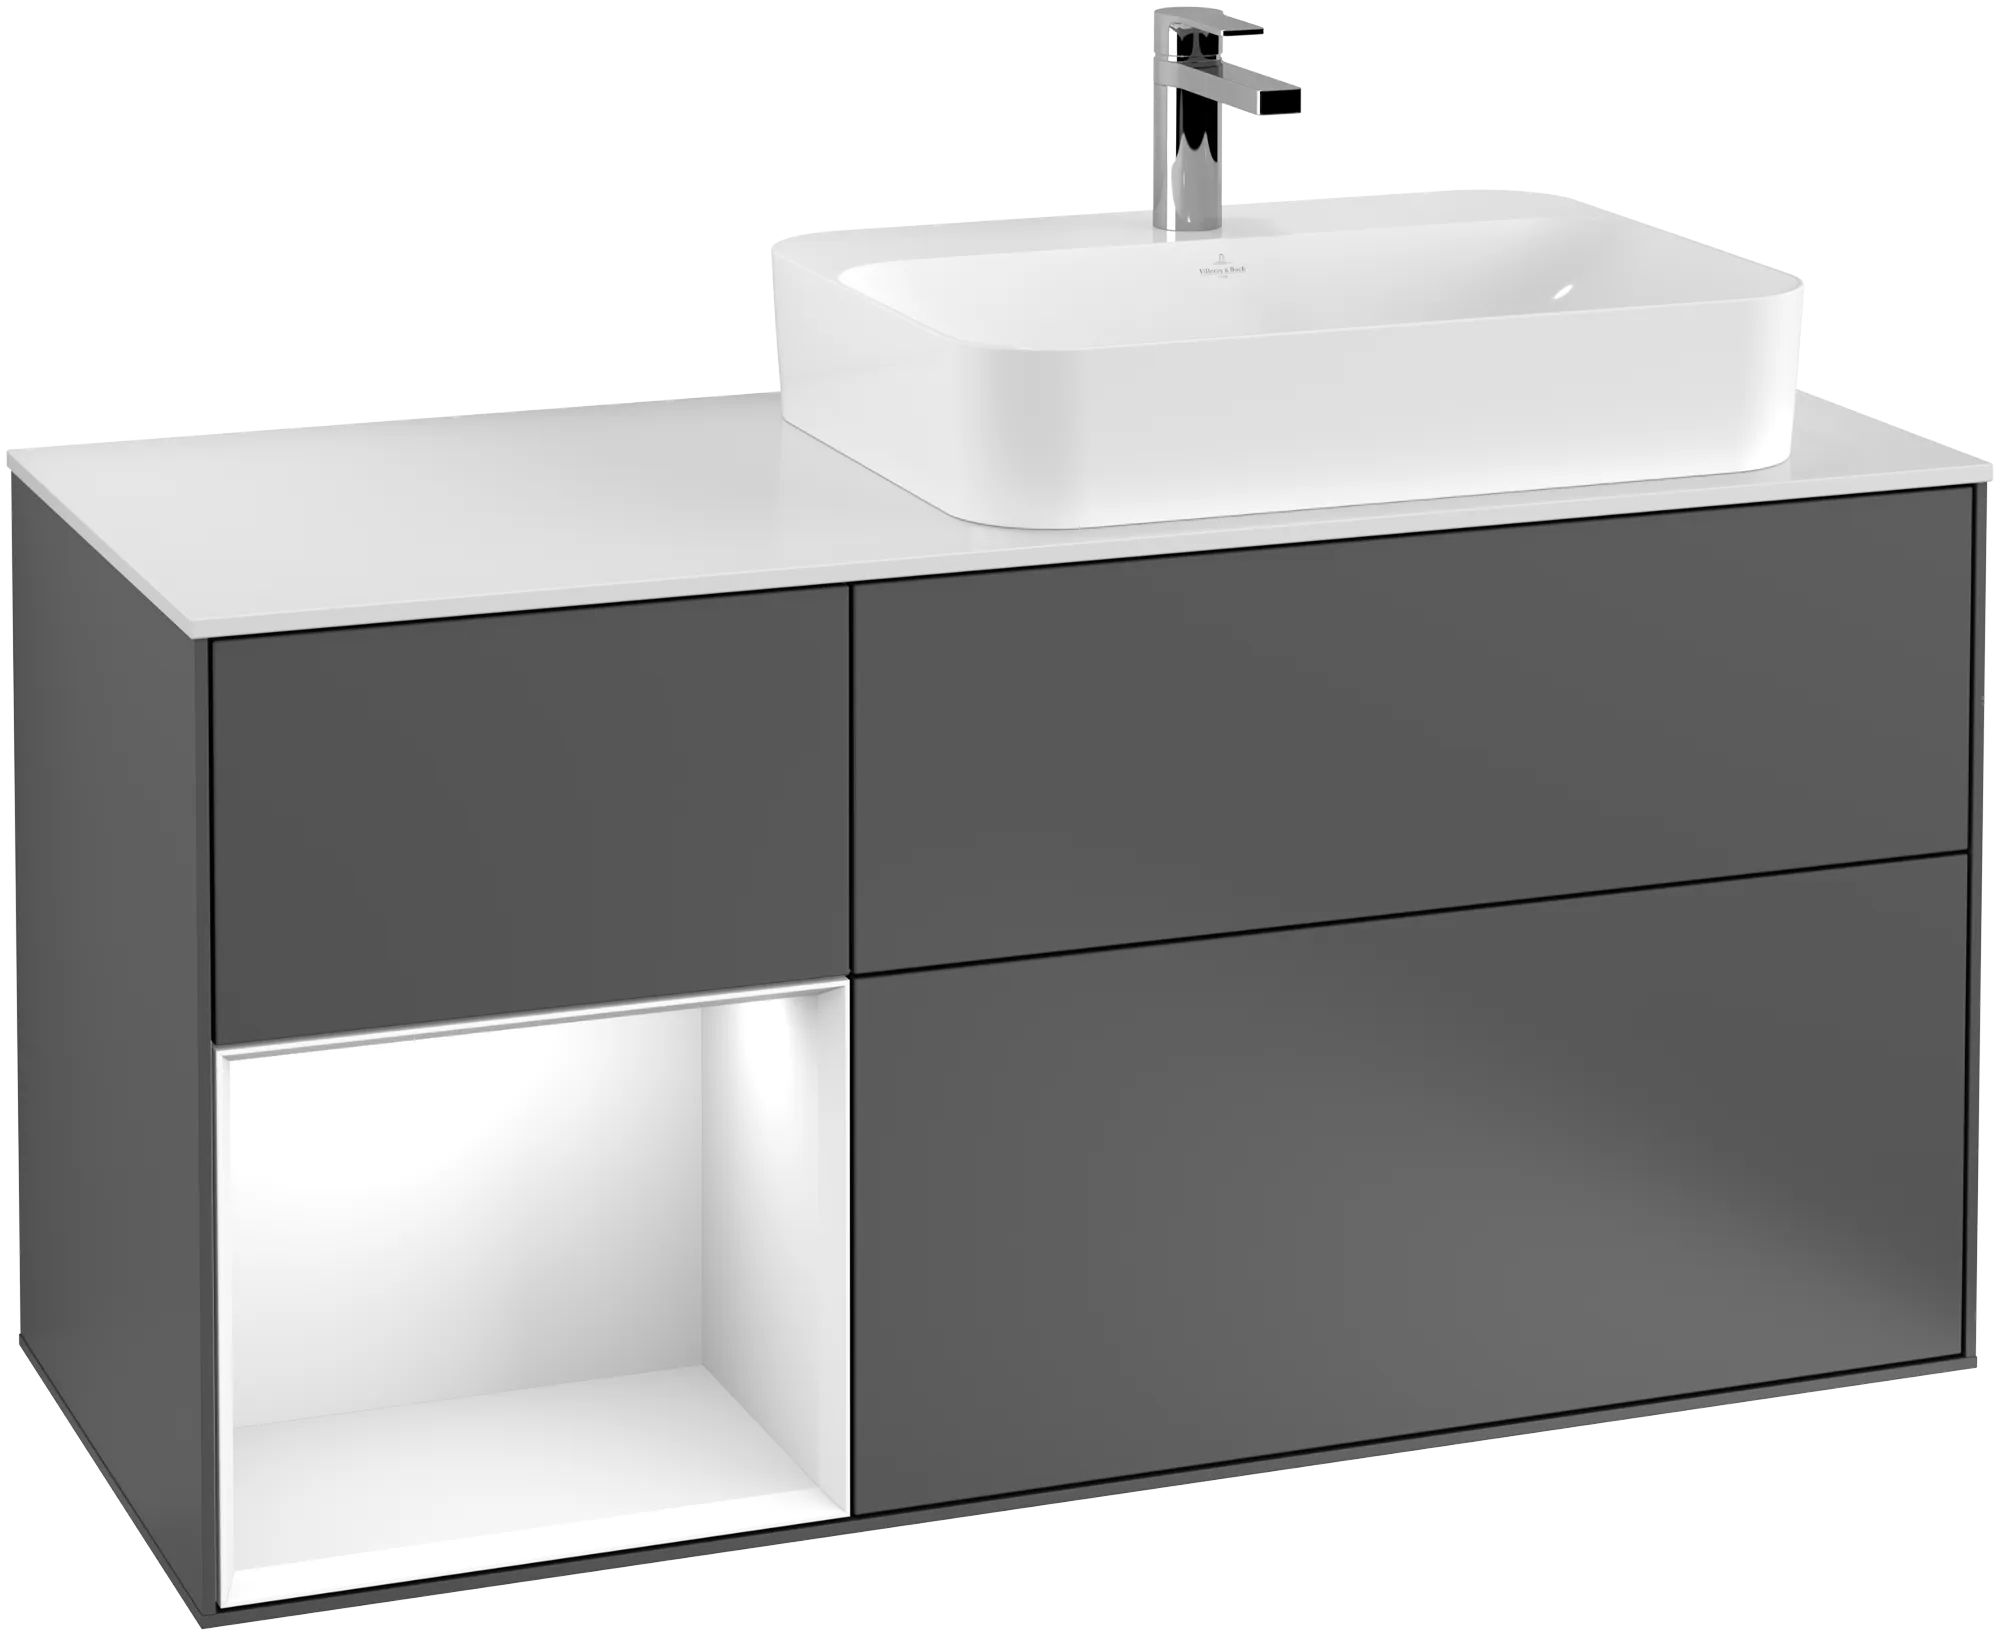 Obrázek VILLEROY BOCH Finion Vanity unit, with lighting, 3 pull-out compartments, 1200 x 603 x 501 mm, Anthracite Matt Lacquer / Glossy White Lacquer / Glass White Matt #G391GFGK